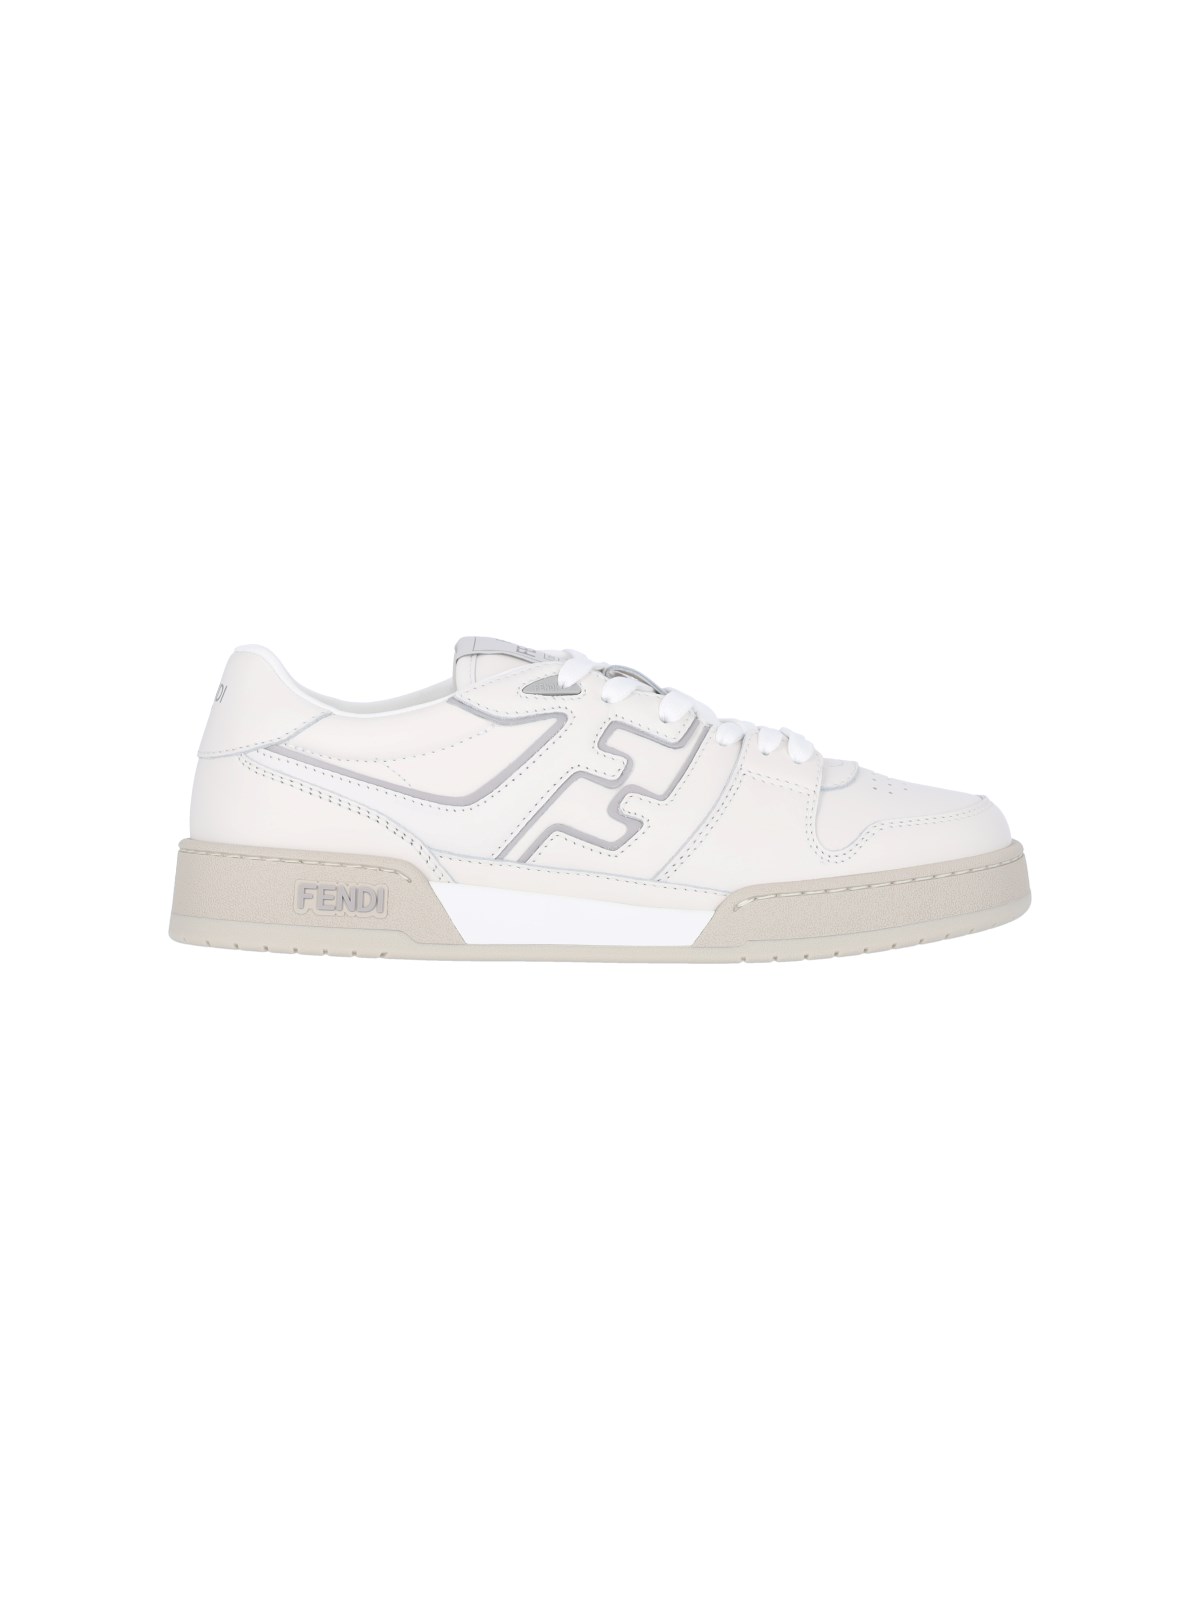 Fendi Low Top "match" Trainers In White